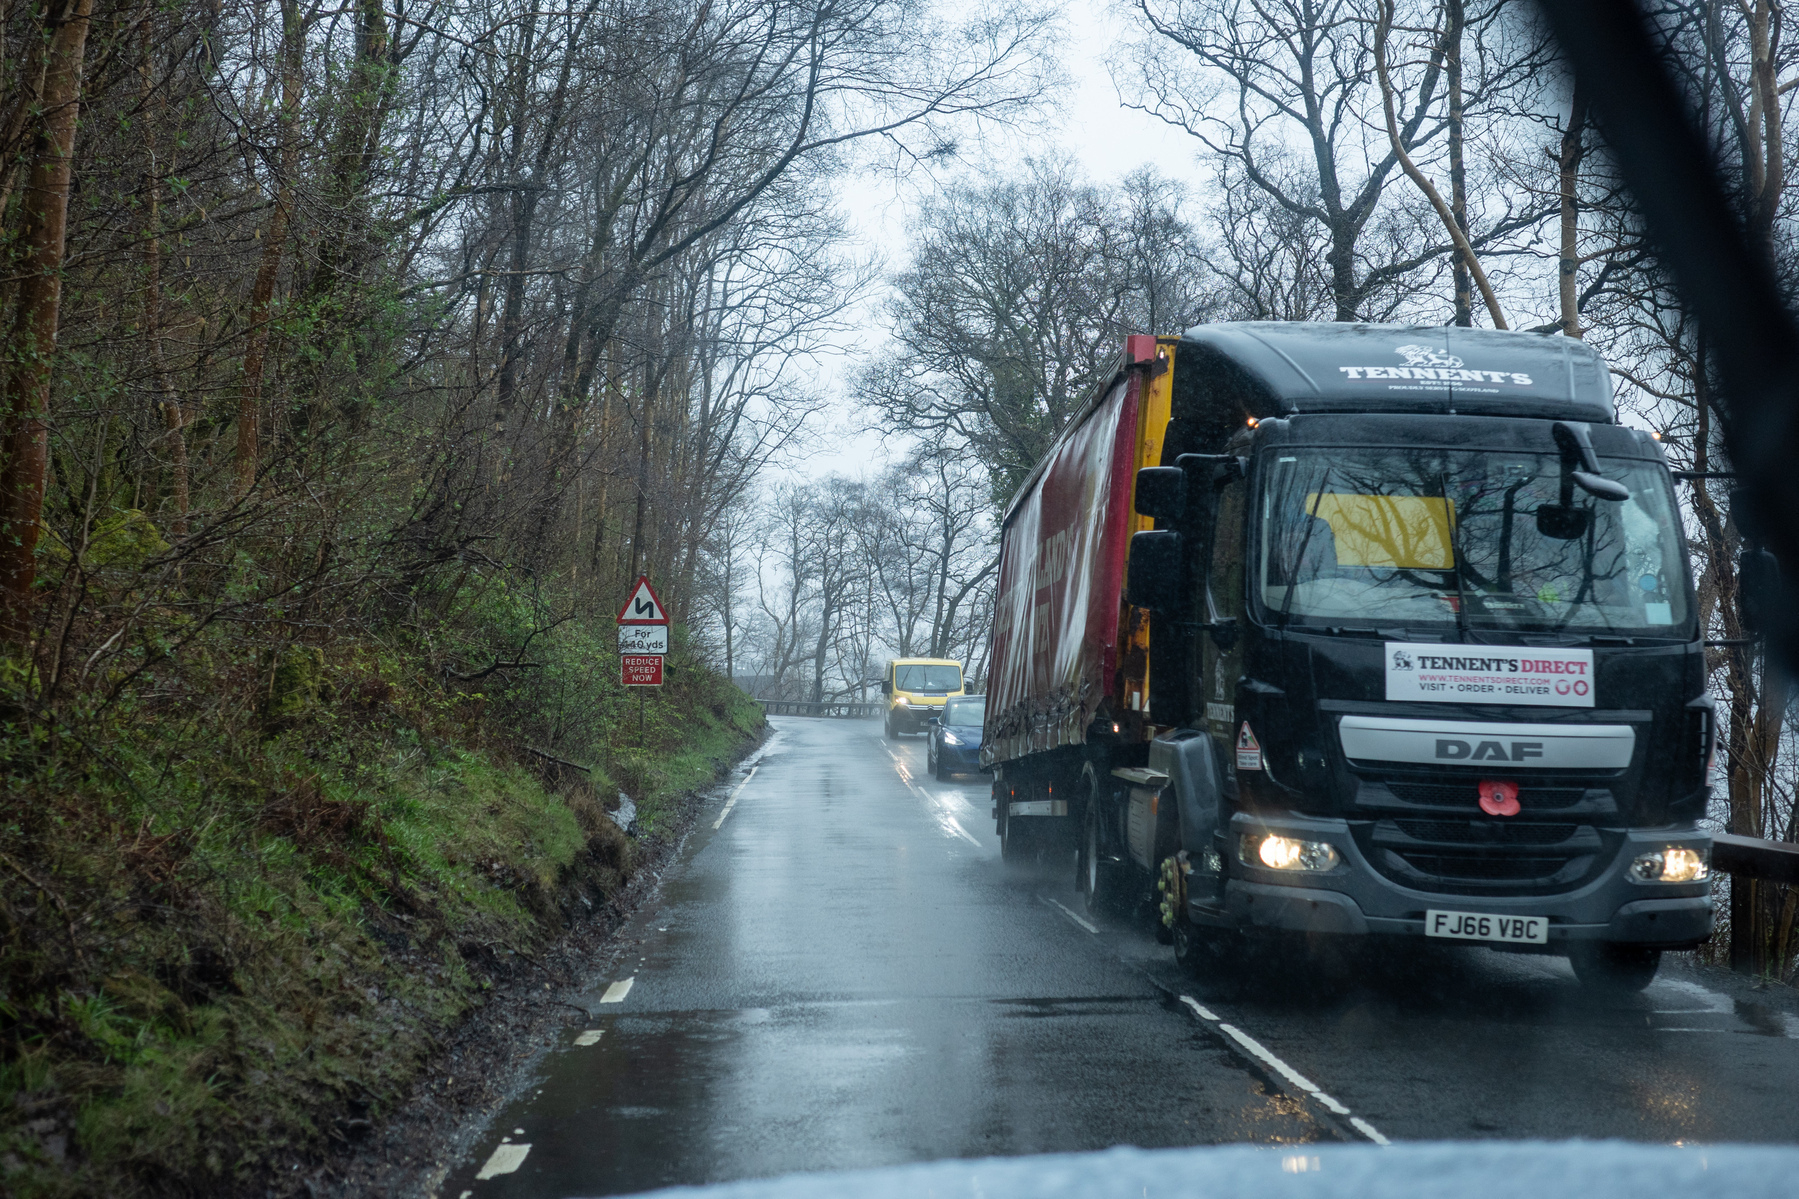 Rainy road - A82. There is a large truck and other vehicles coming the other way.